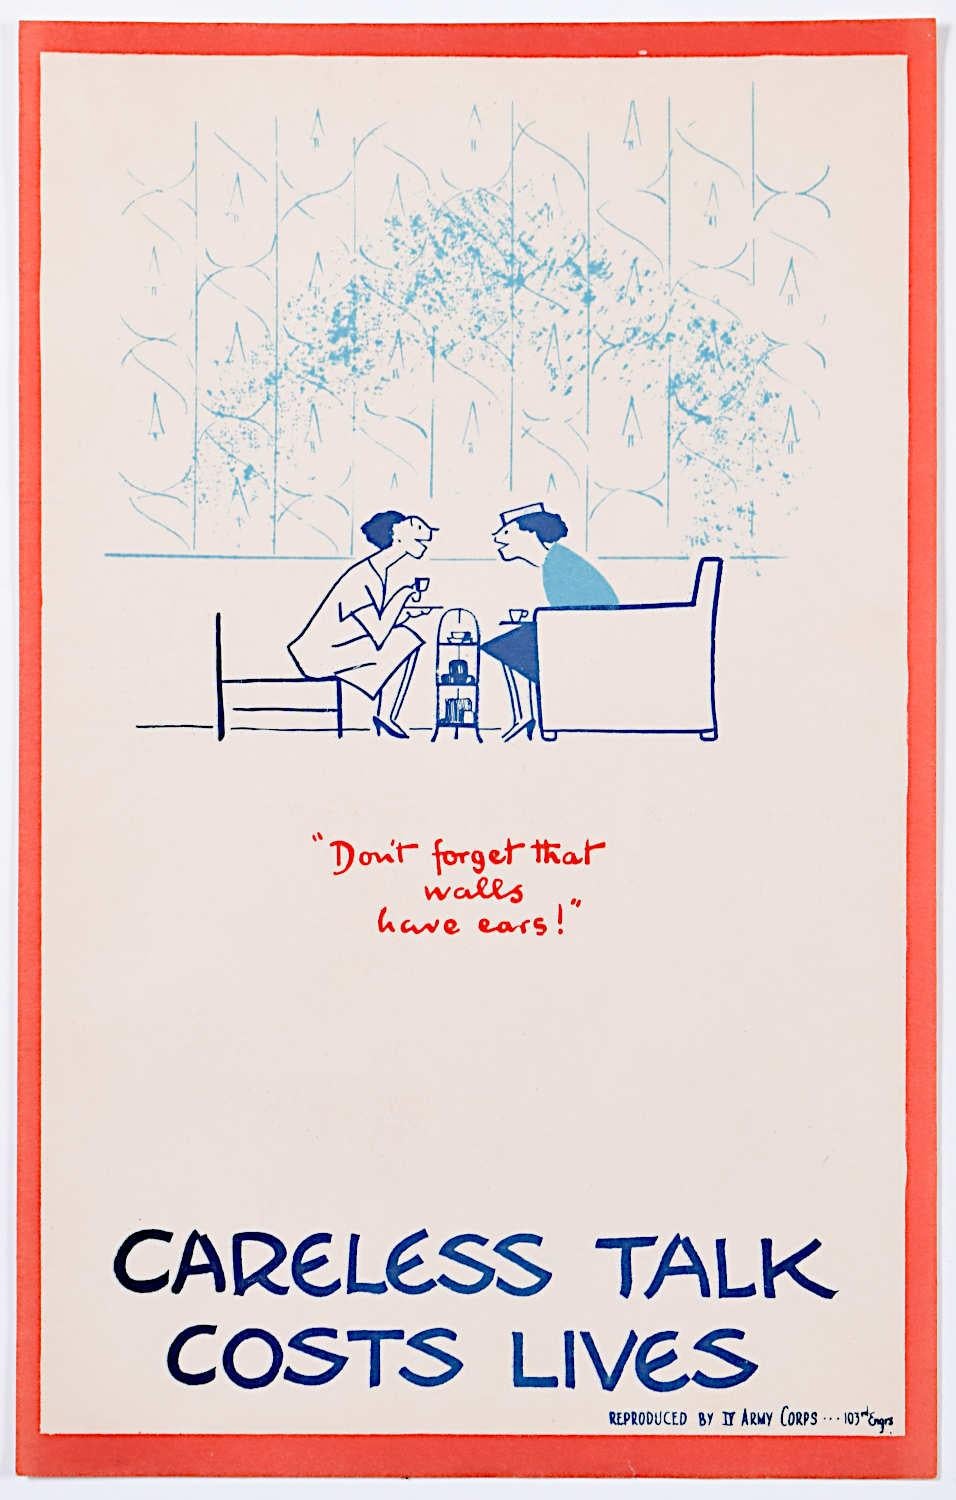 Fougasse (Cyril Kenneth Bird) Print - Careless Talk Costs Lives 'Fougasse' IV Army Corps Edition World War 2 Poster